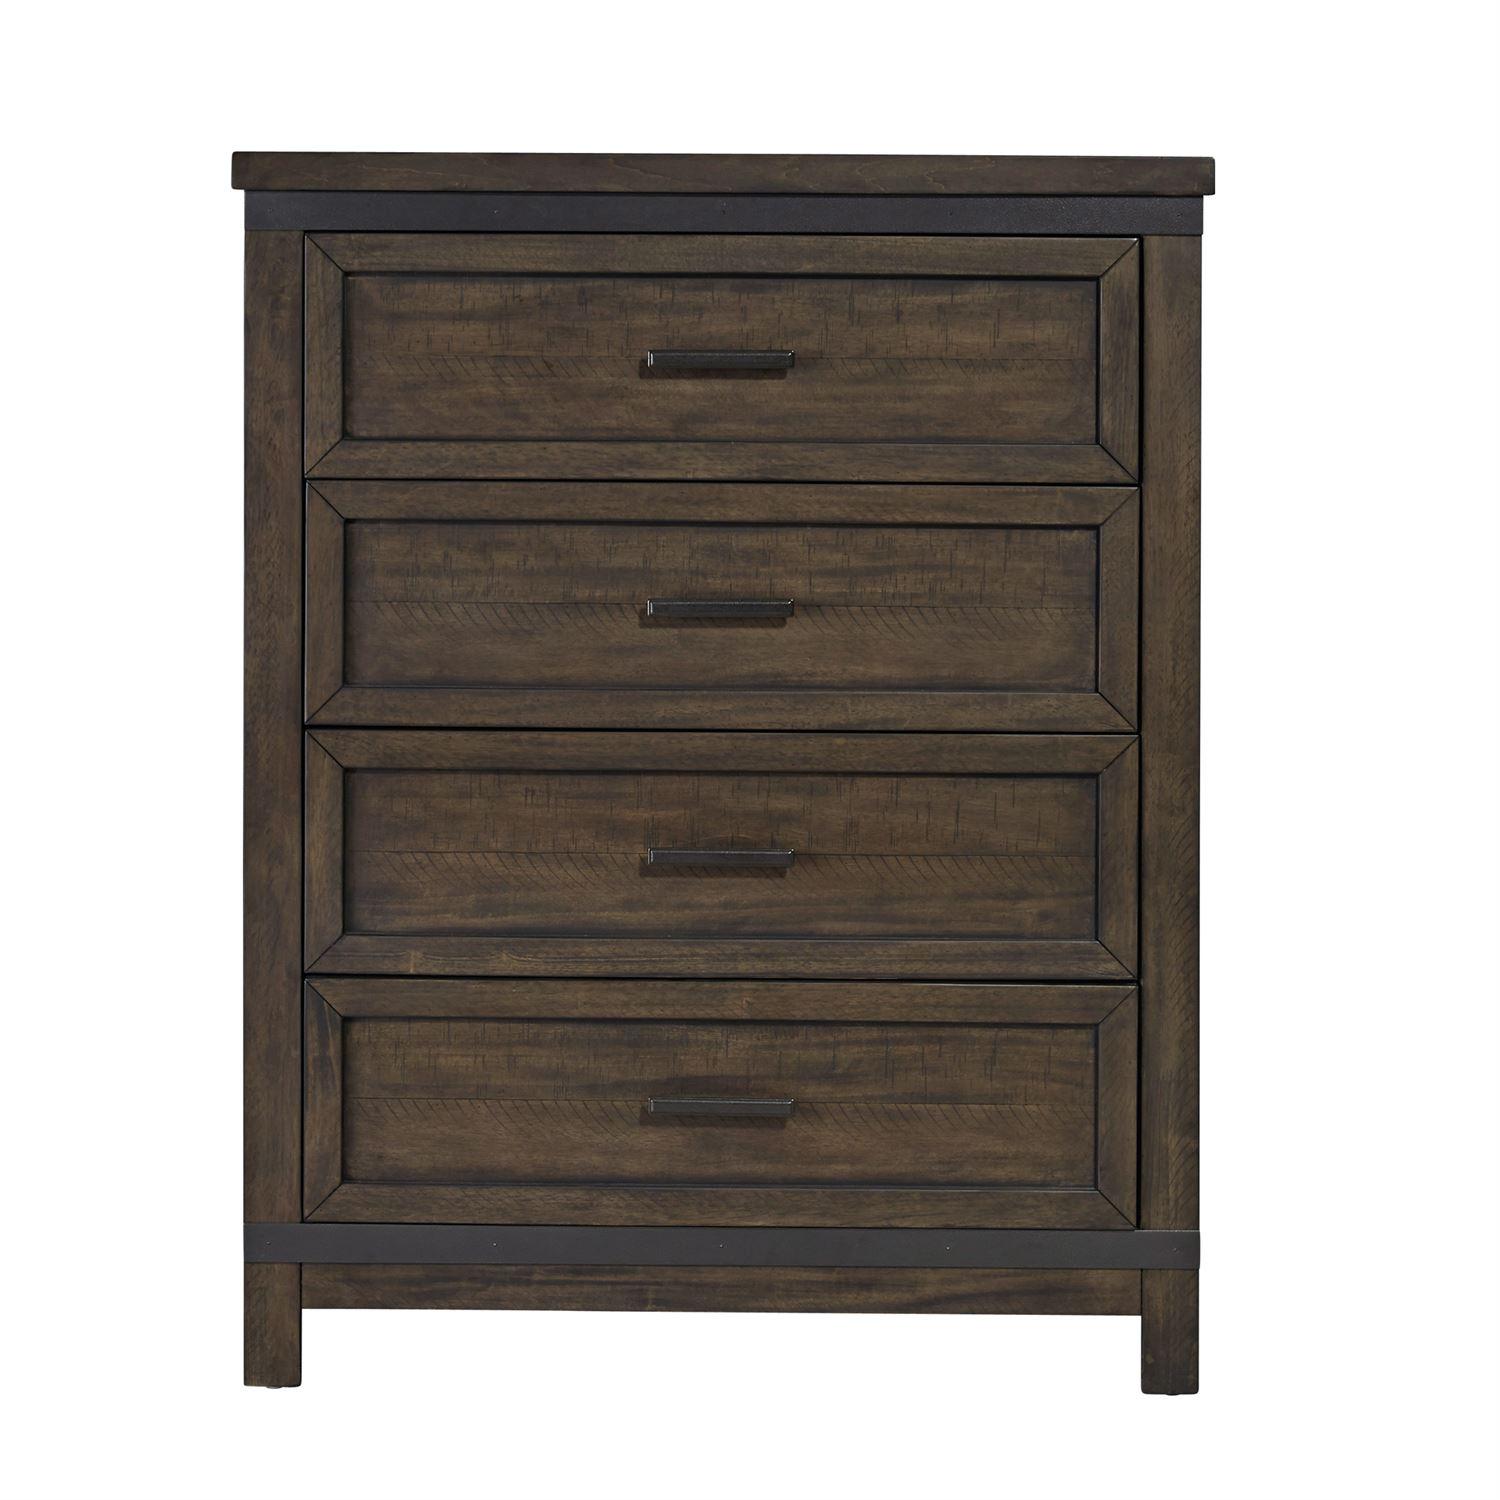 Rustic Bachelor Chest Thornwood Hills  (759-YBR) Bachelor Chest 759-BR40 in Gray 